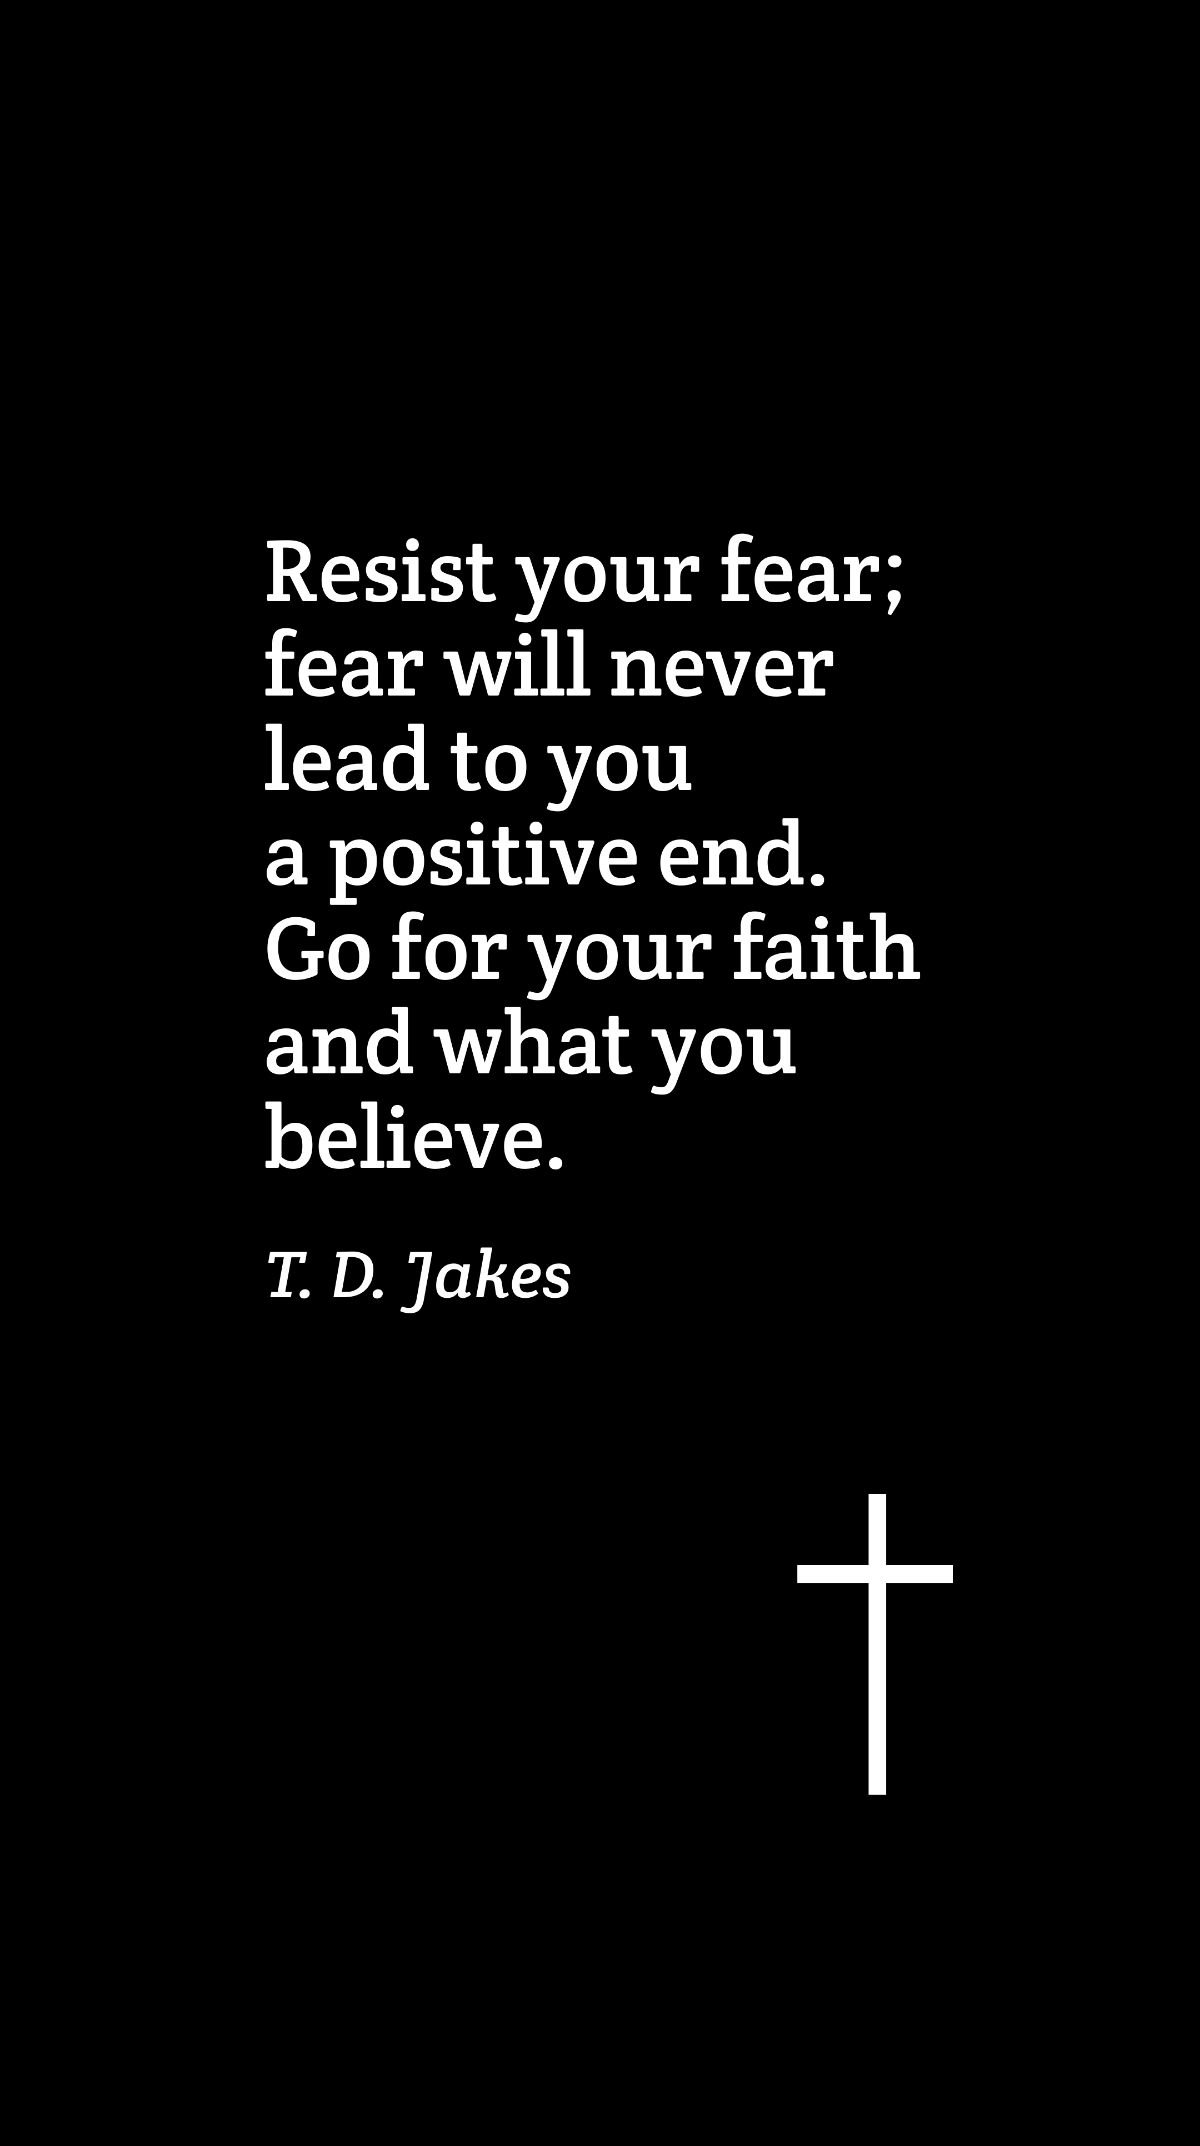 Free T. D. Jakes - Resist your fear; fear will never lead to you a positive end. Go for your faith and what you believe. Template